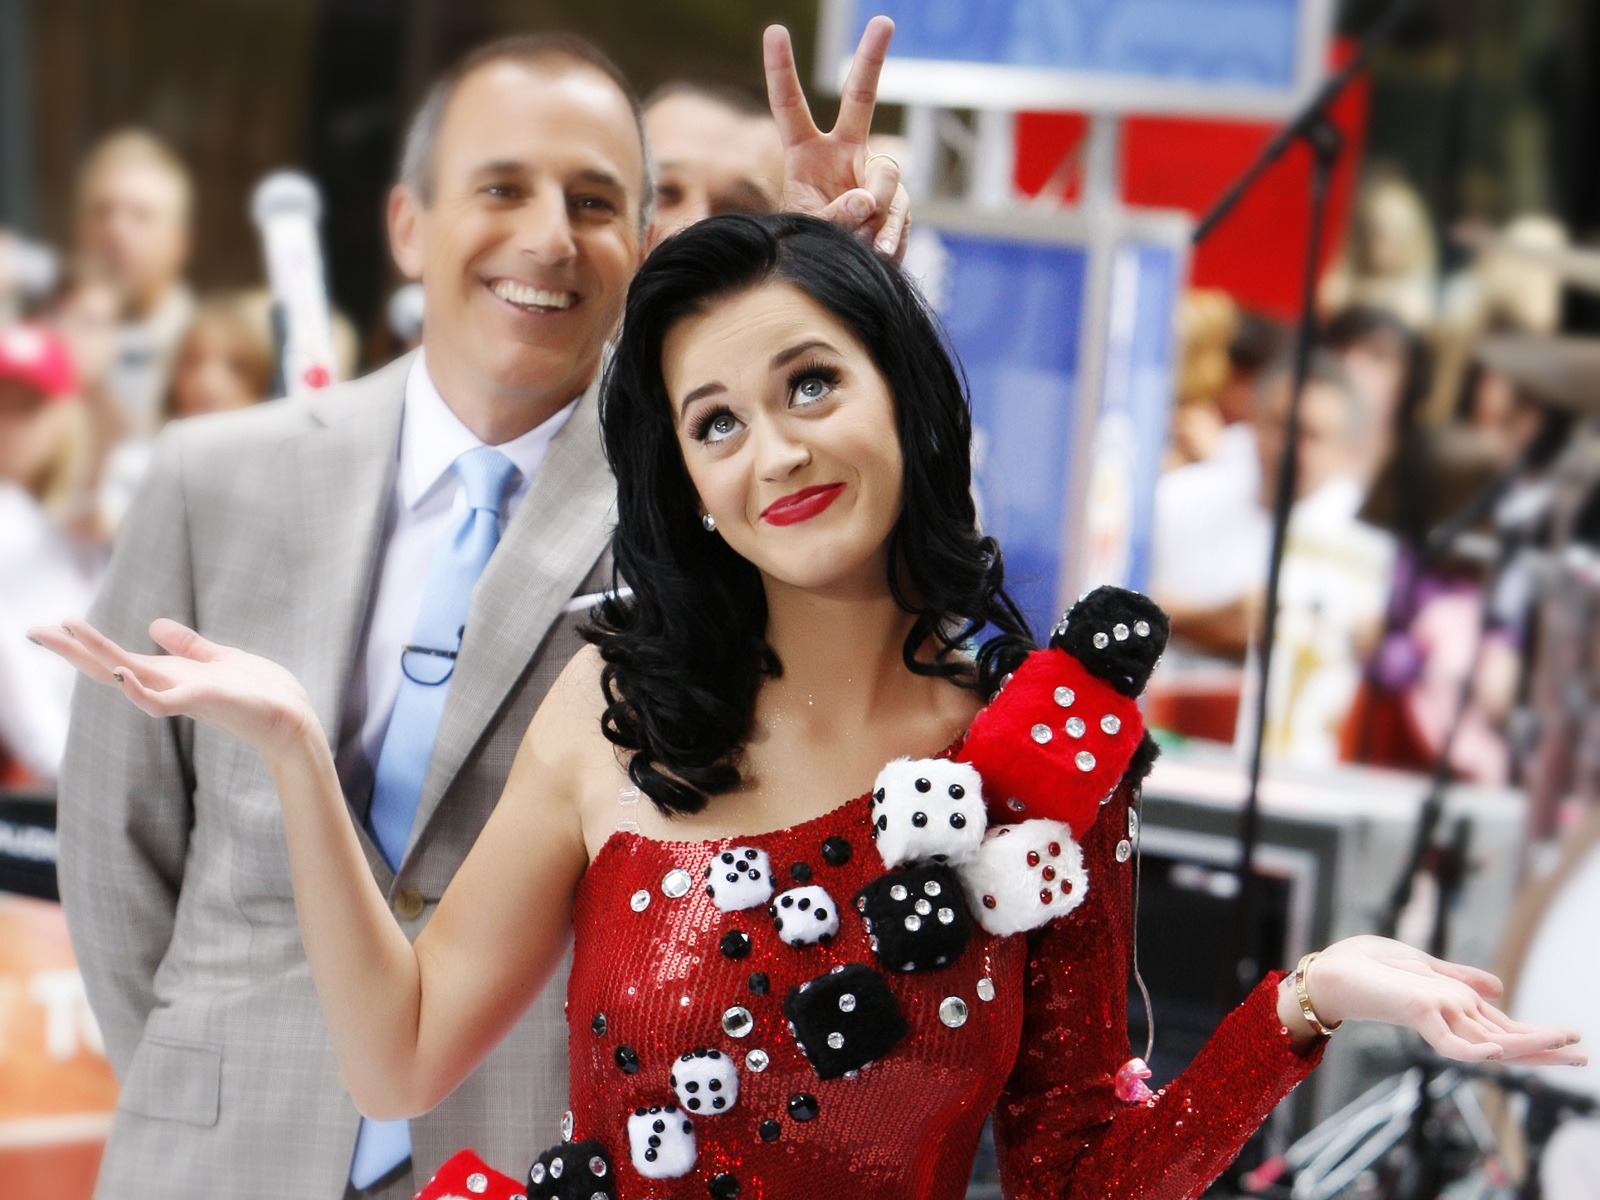 Funny Katy Perry for 1600 x 1200 resolution